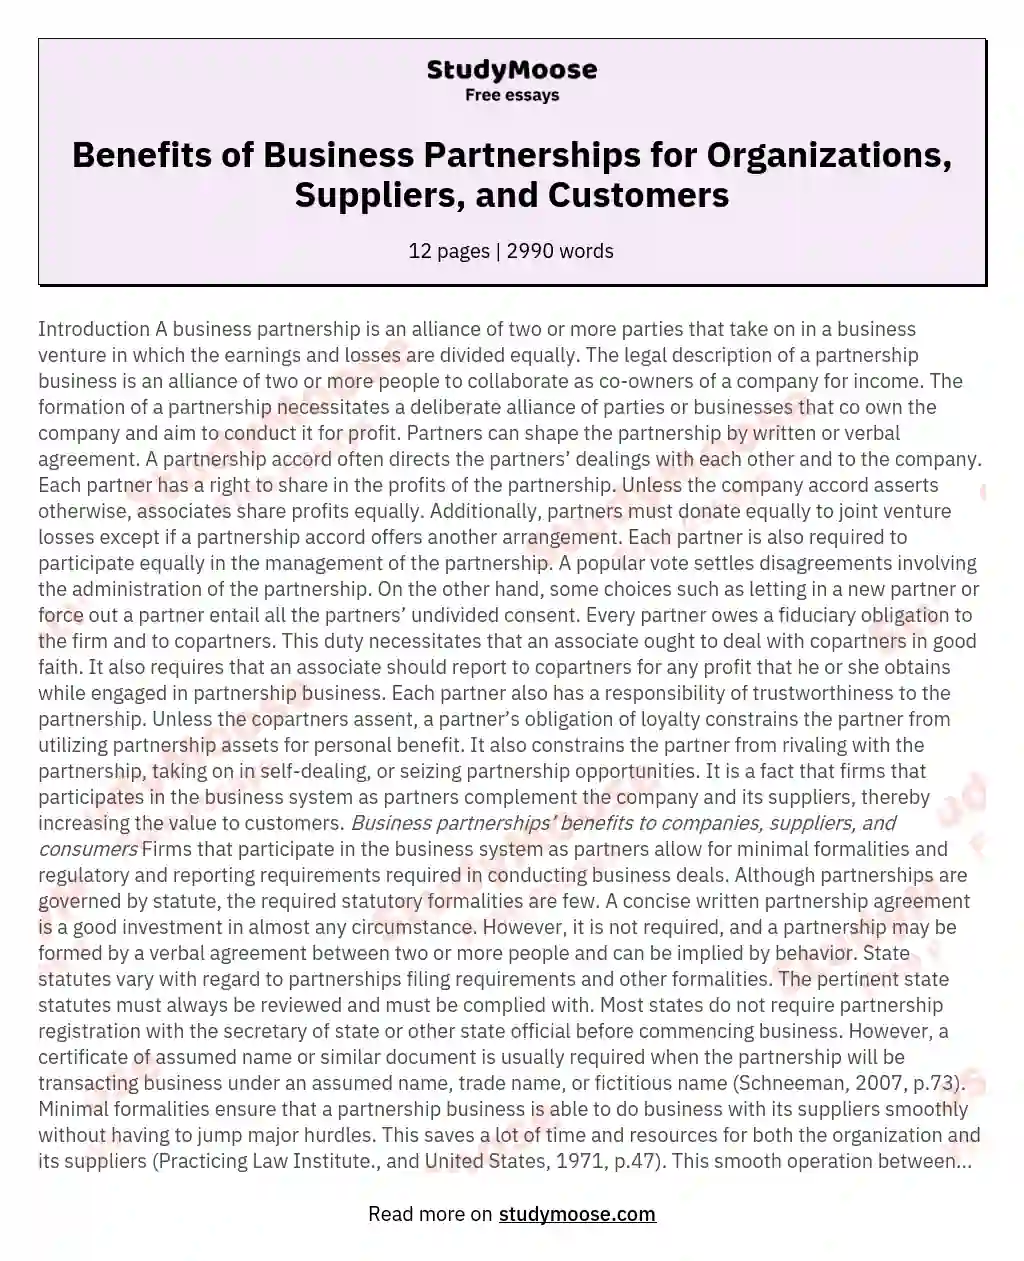 Benefits of Business Partnerships for Organizations, Suppliers, and Customers essay